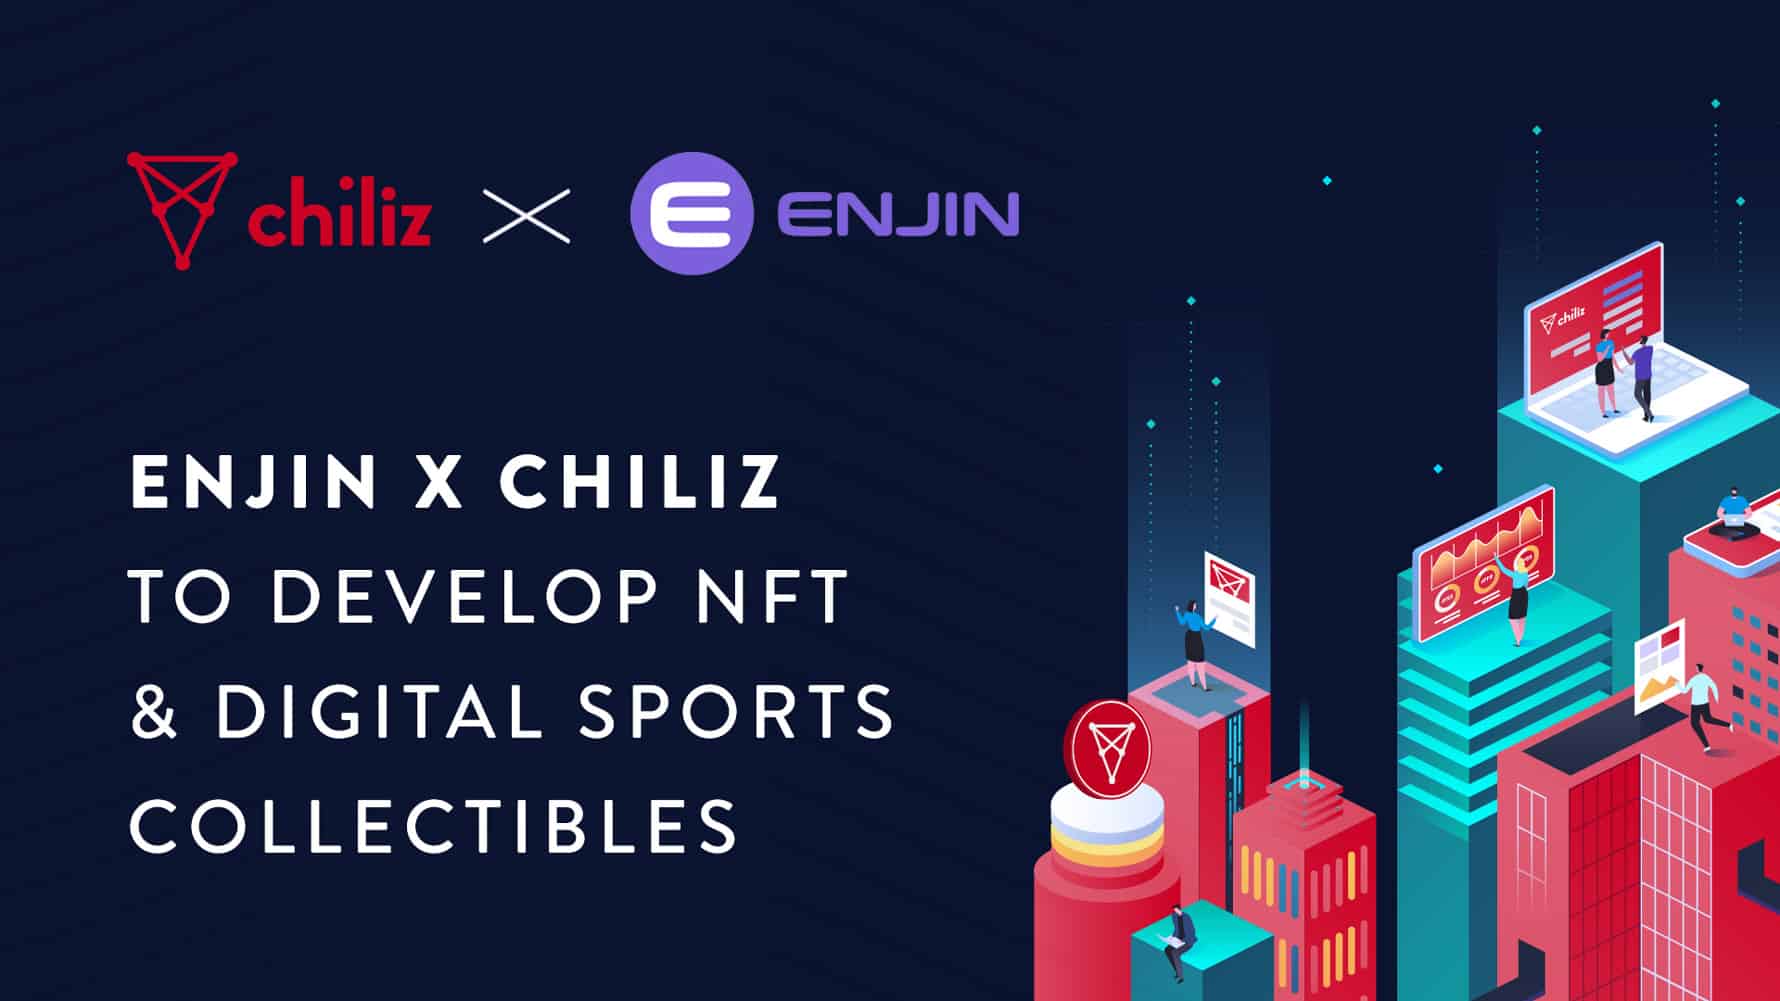 enjin chiliz partnership Chilliz, a fan engagement-focused project announced a collaboration with the gaming cryptocurrency Enjin Coin. Starting with Socios.com, Chilliz will use Enjin's blockchain development platform to create branded collectibles for world-known sports and entertainment industry partners. Noteworthy, Juventus, Paris Saint-Germain, Atlético de Madrid and Dota 2 champions OG are among them.